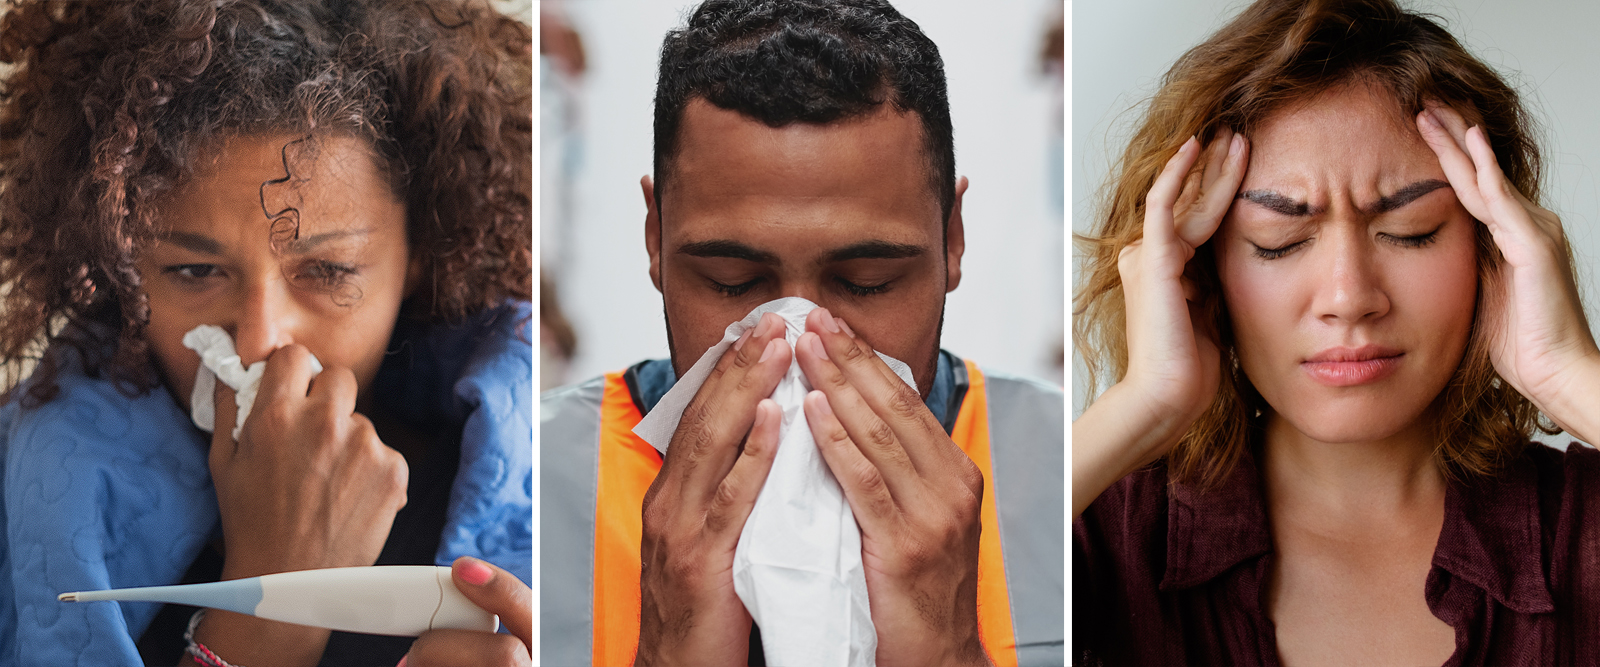 Is It Flu, COVID-19, Allergies, or a Cold?